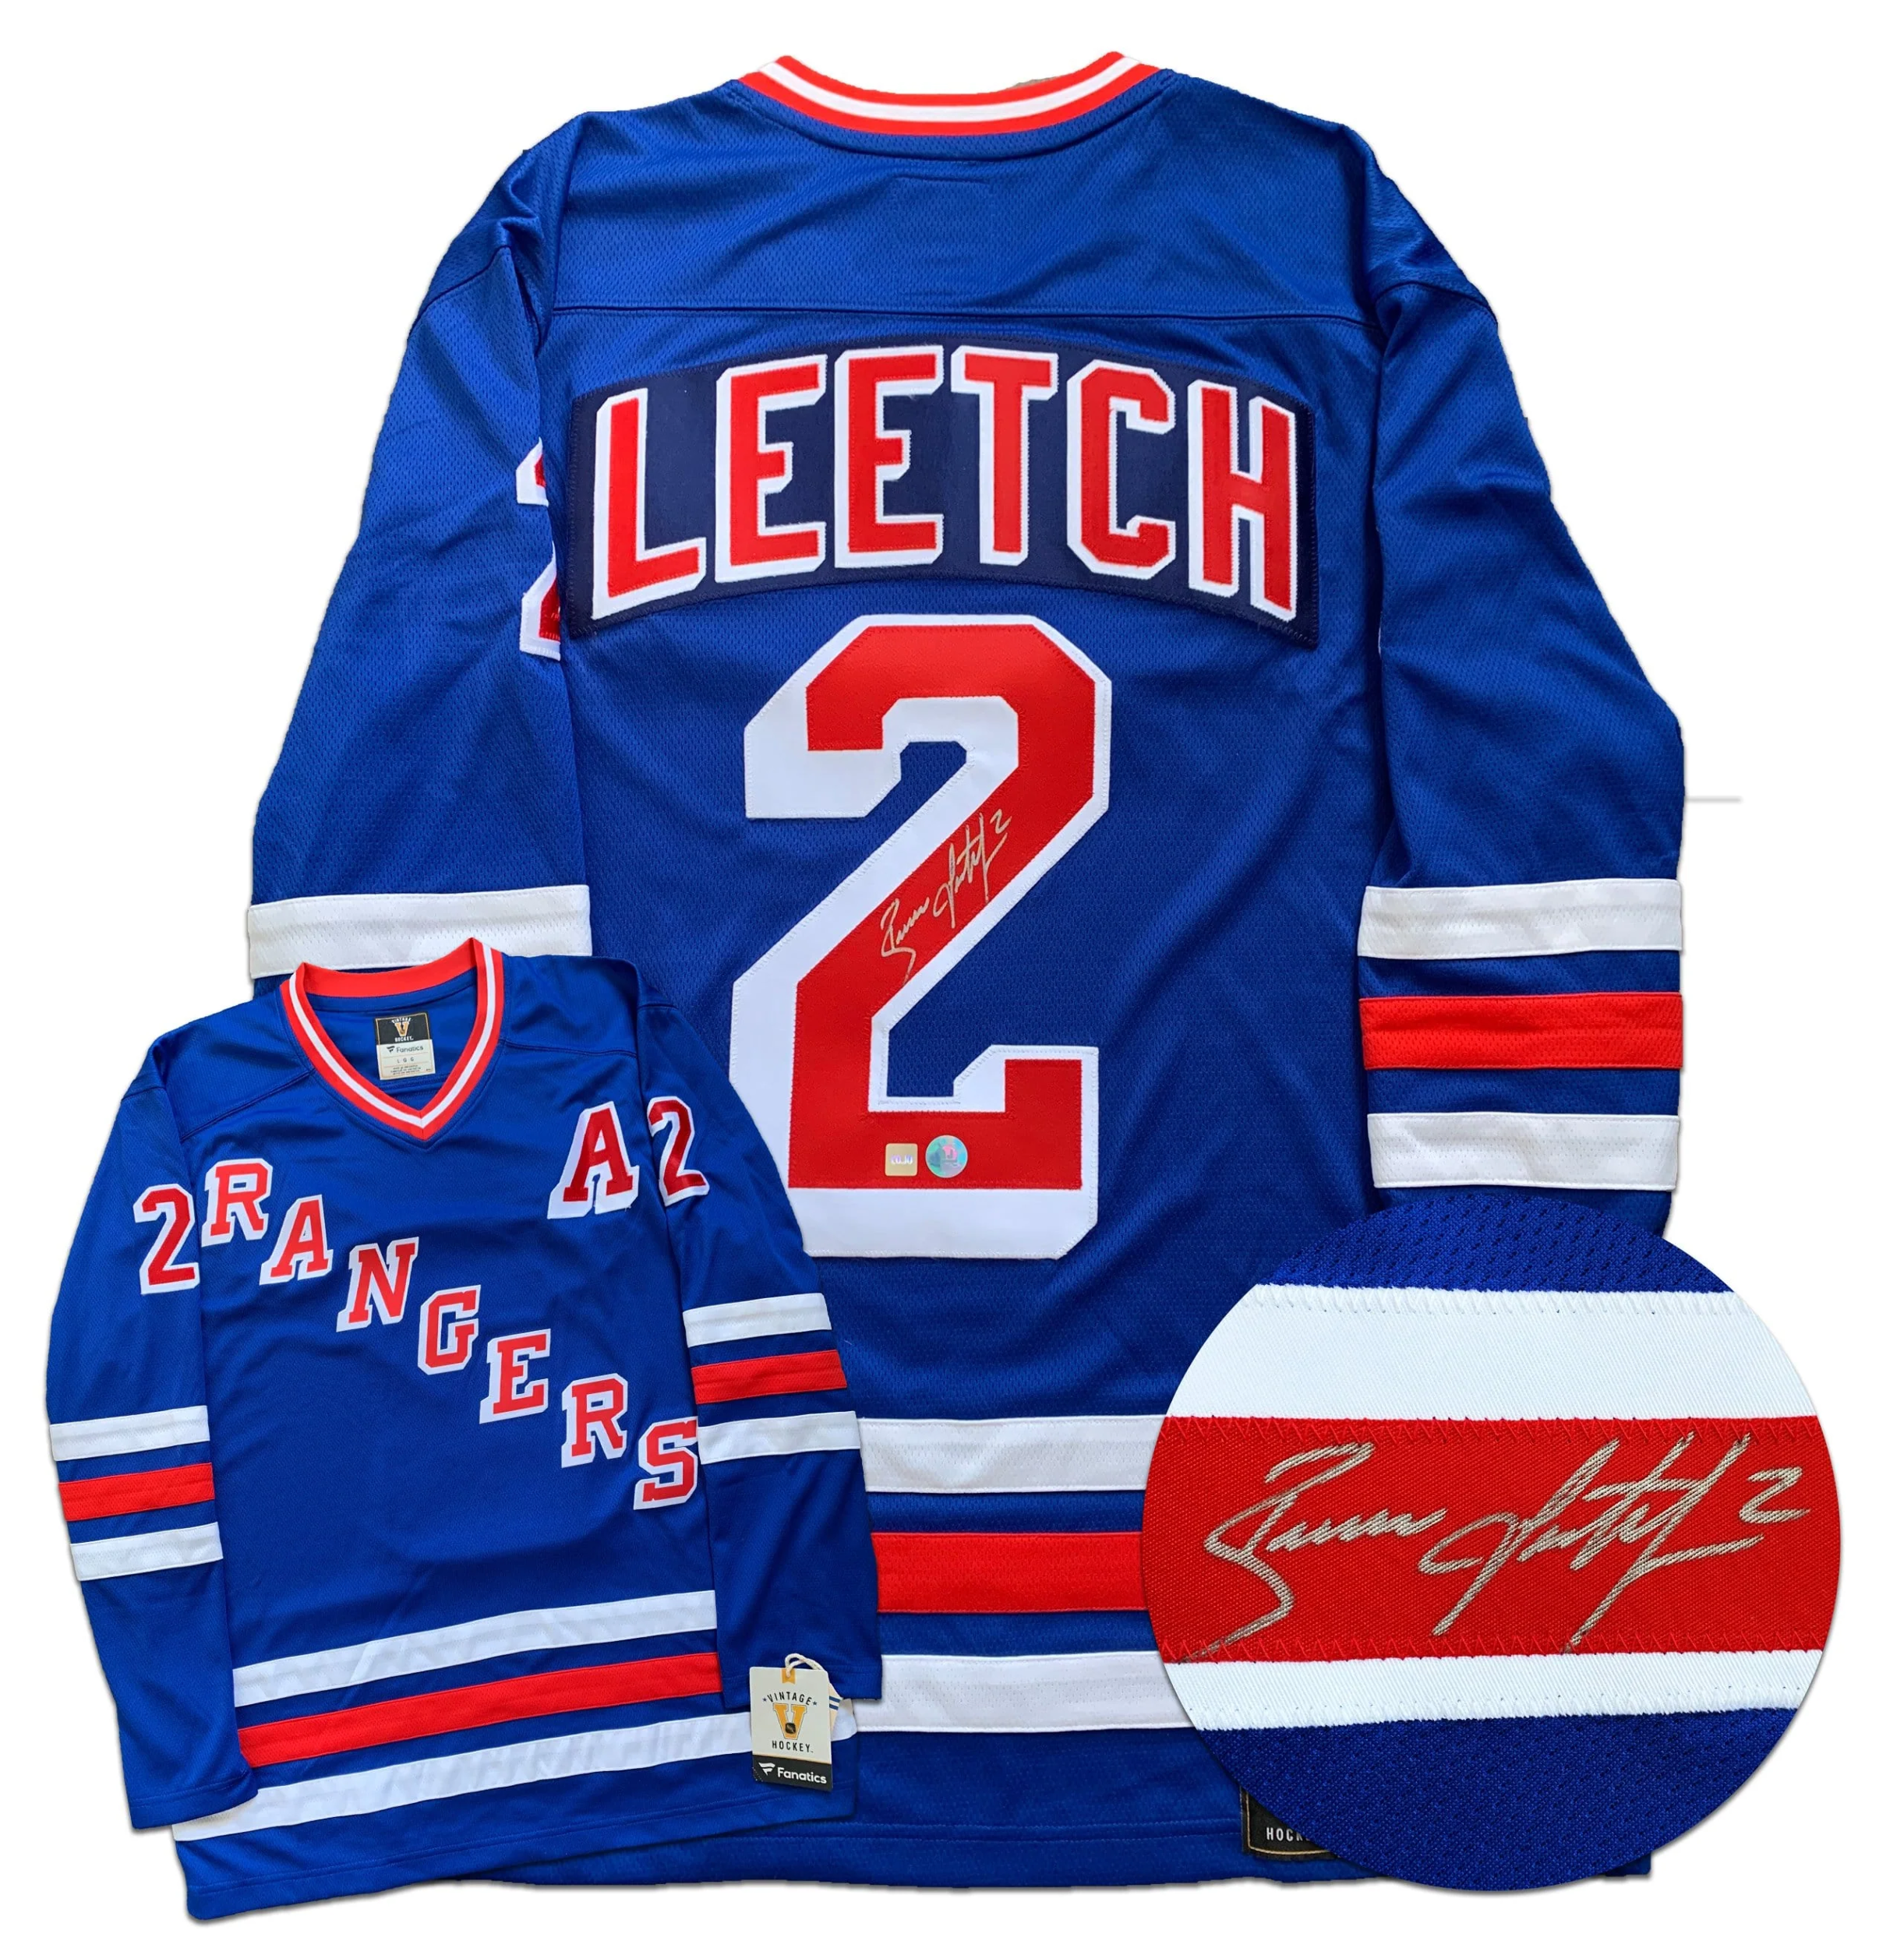 brian leetch signed jersey